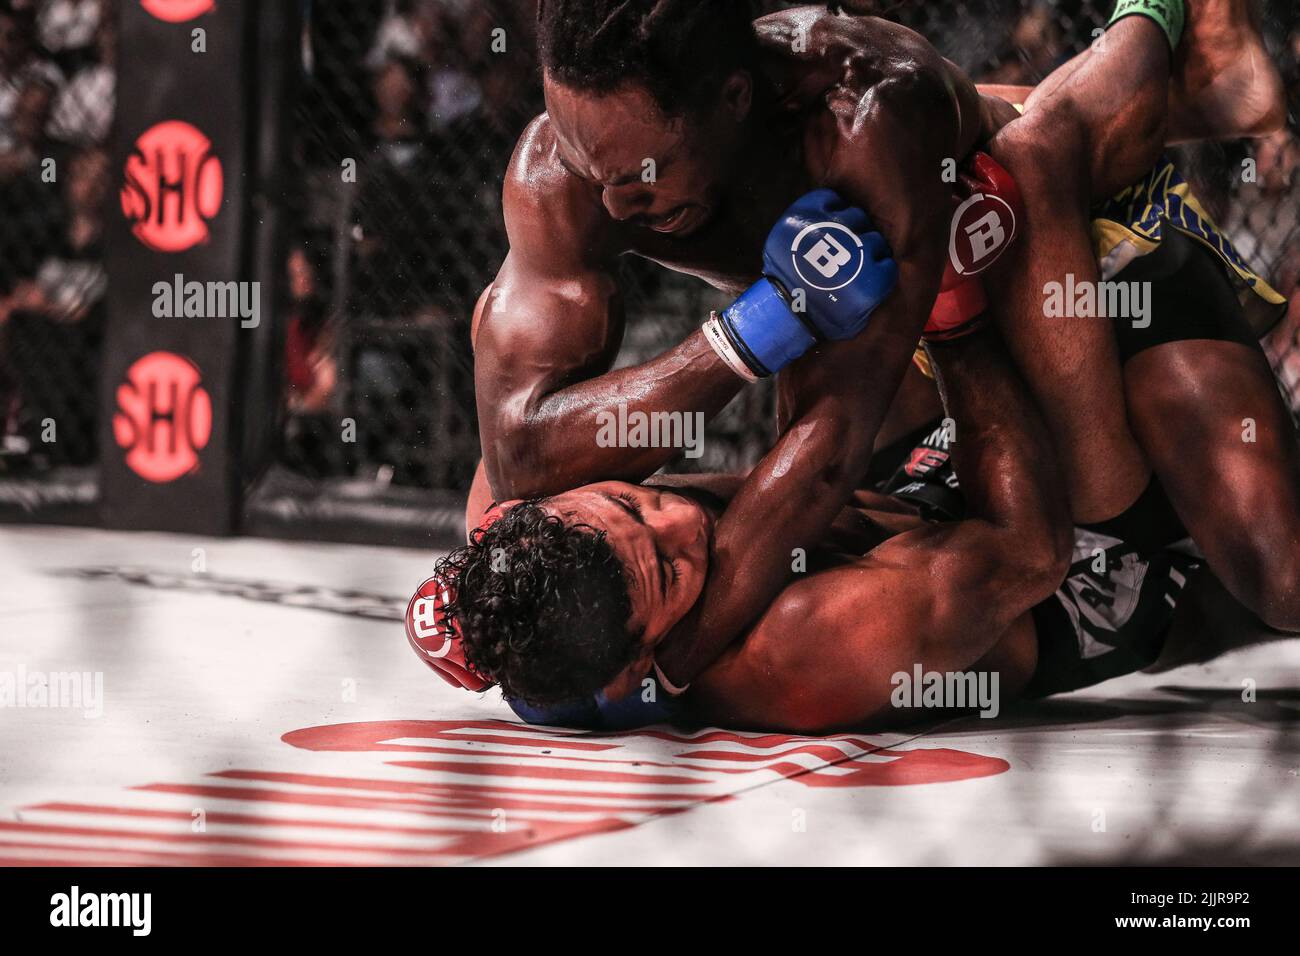 Jason Jackson delivers a right elbow to the head of Douglas Lima while inside his guard at Bellator 283. Jason Jackson defeats Douglas Lima by way of Stock Photo